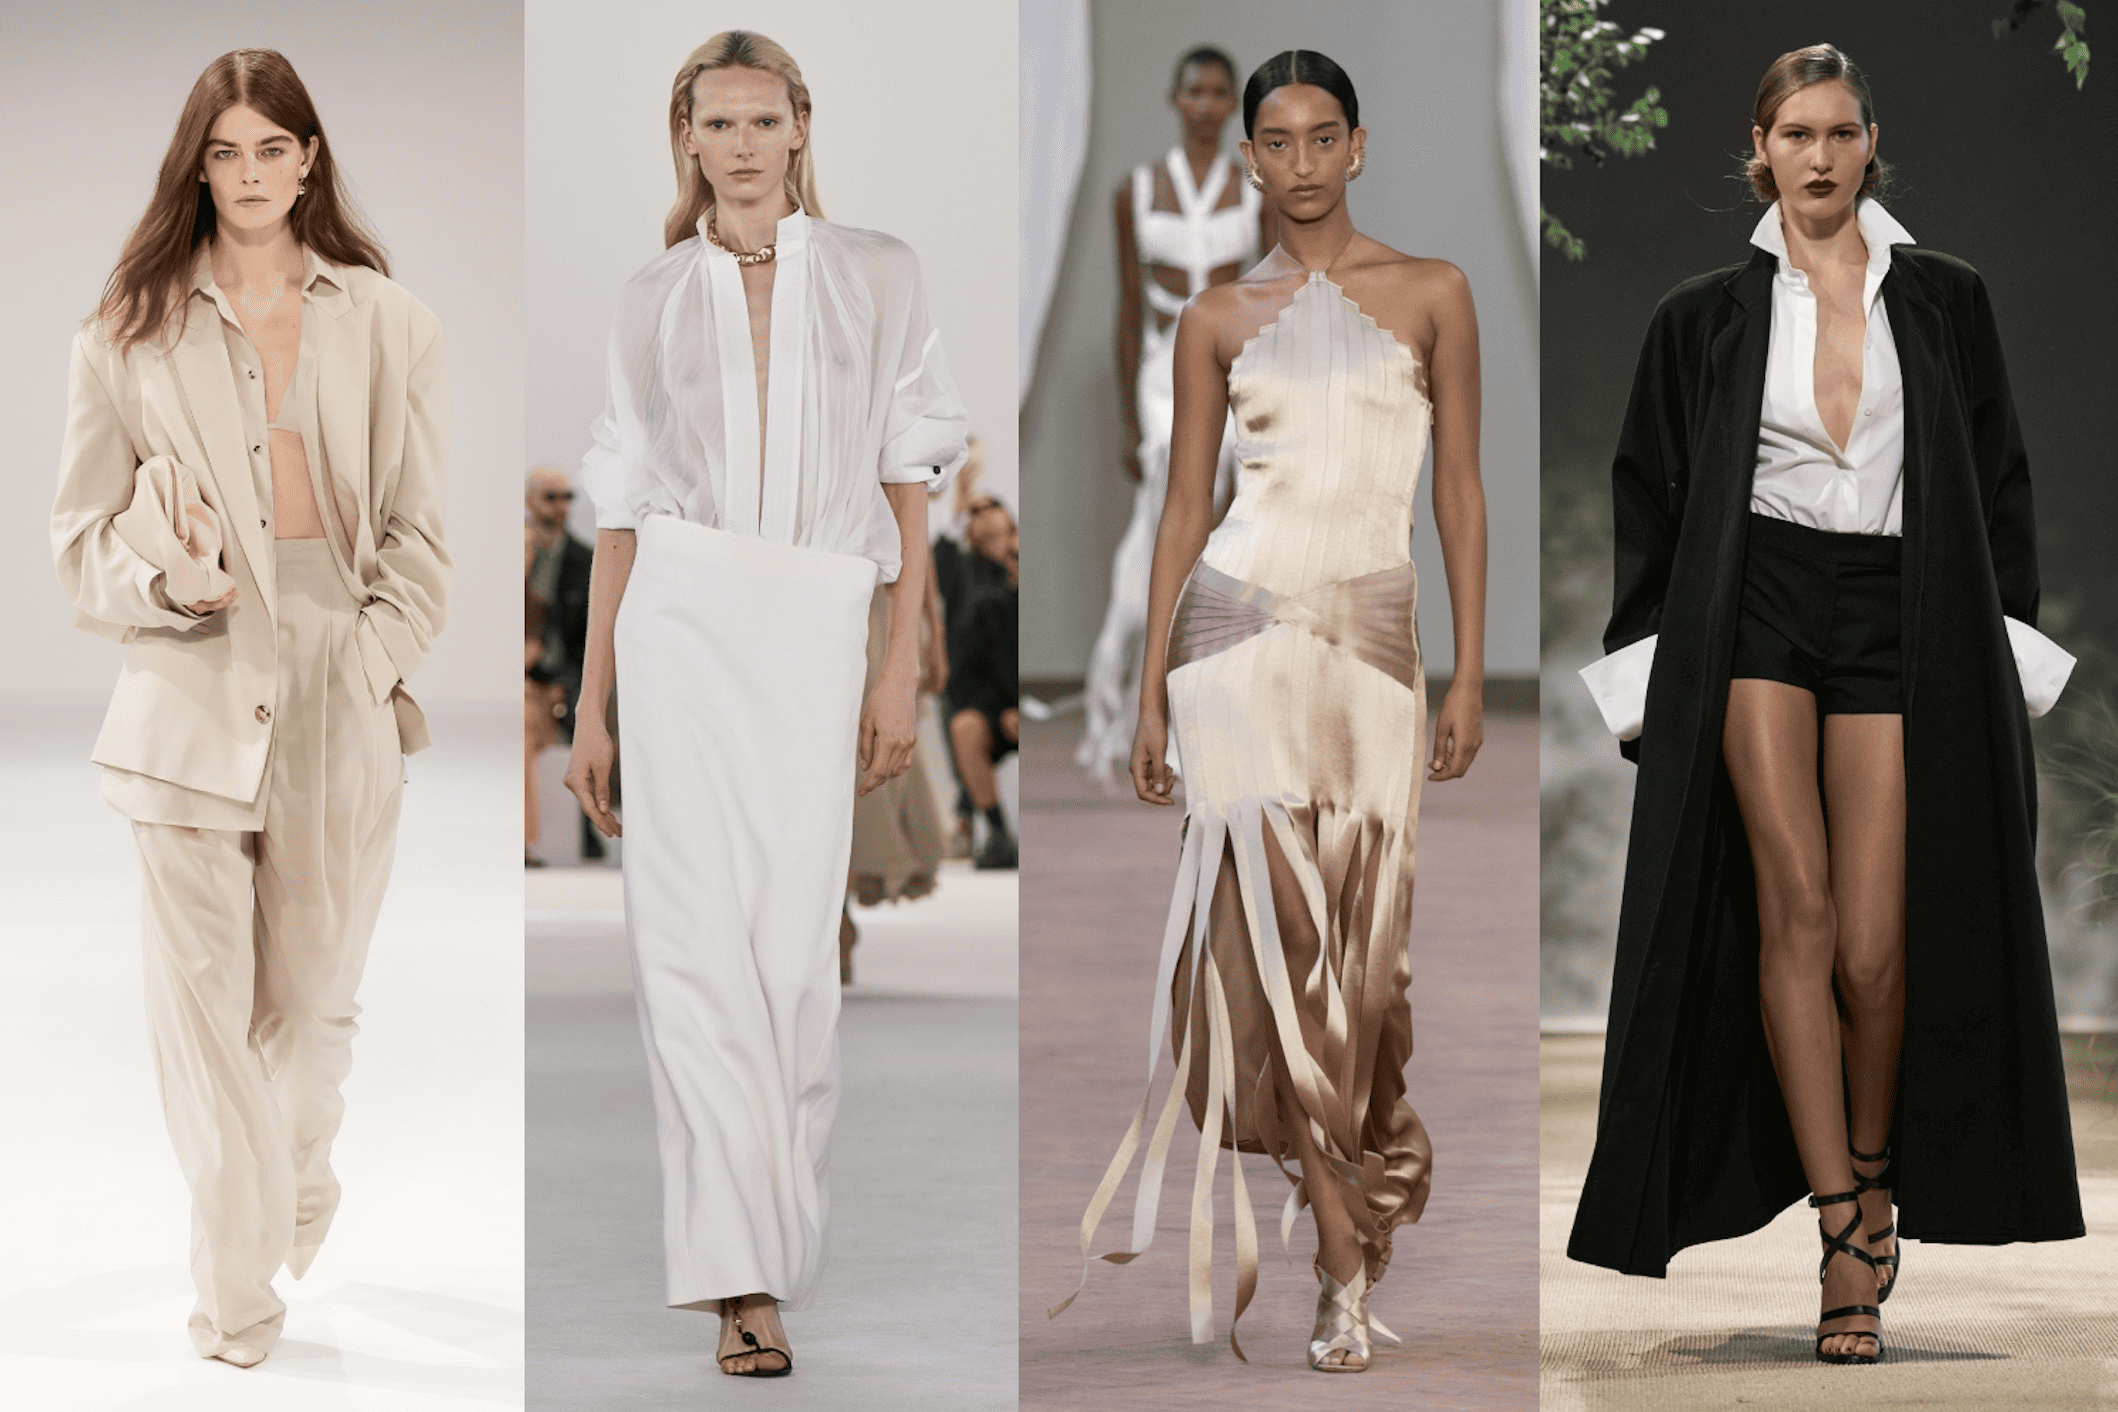 Milan Fashion Week: What Do We Want To Wear Now?